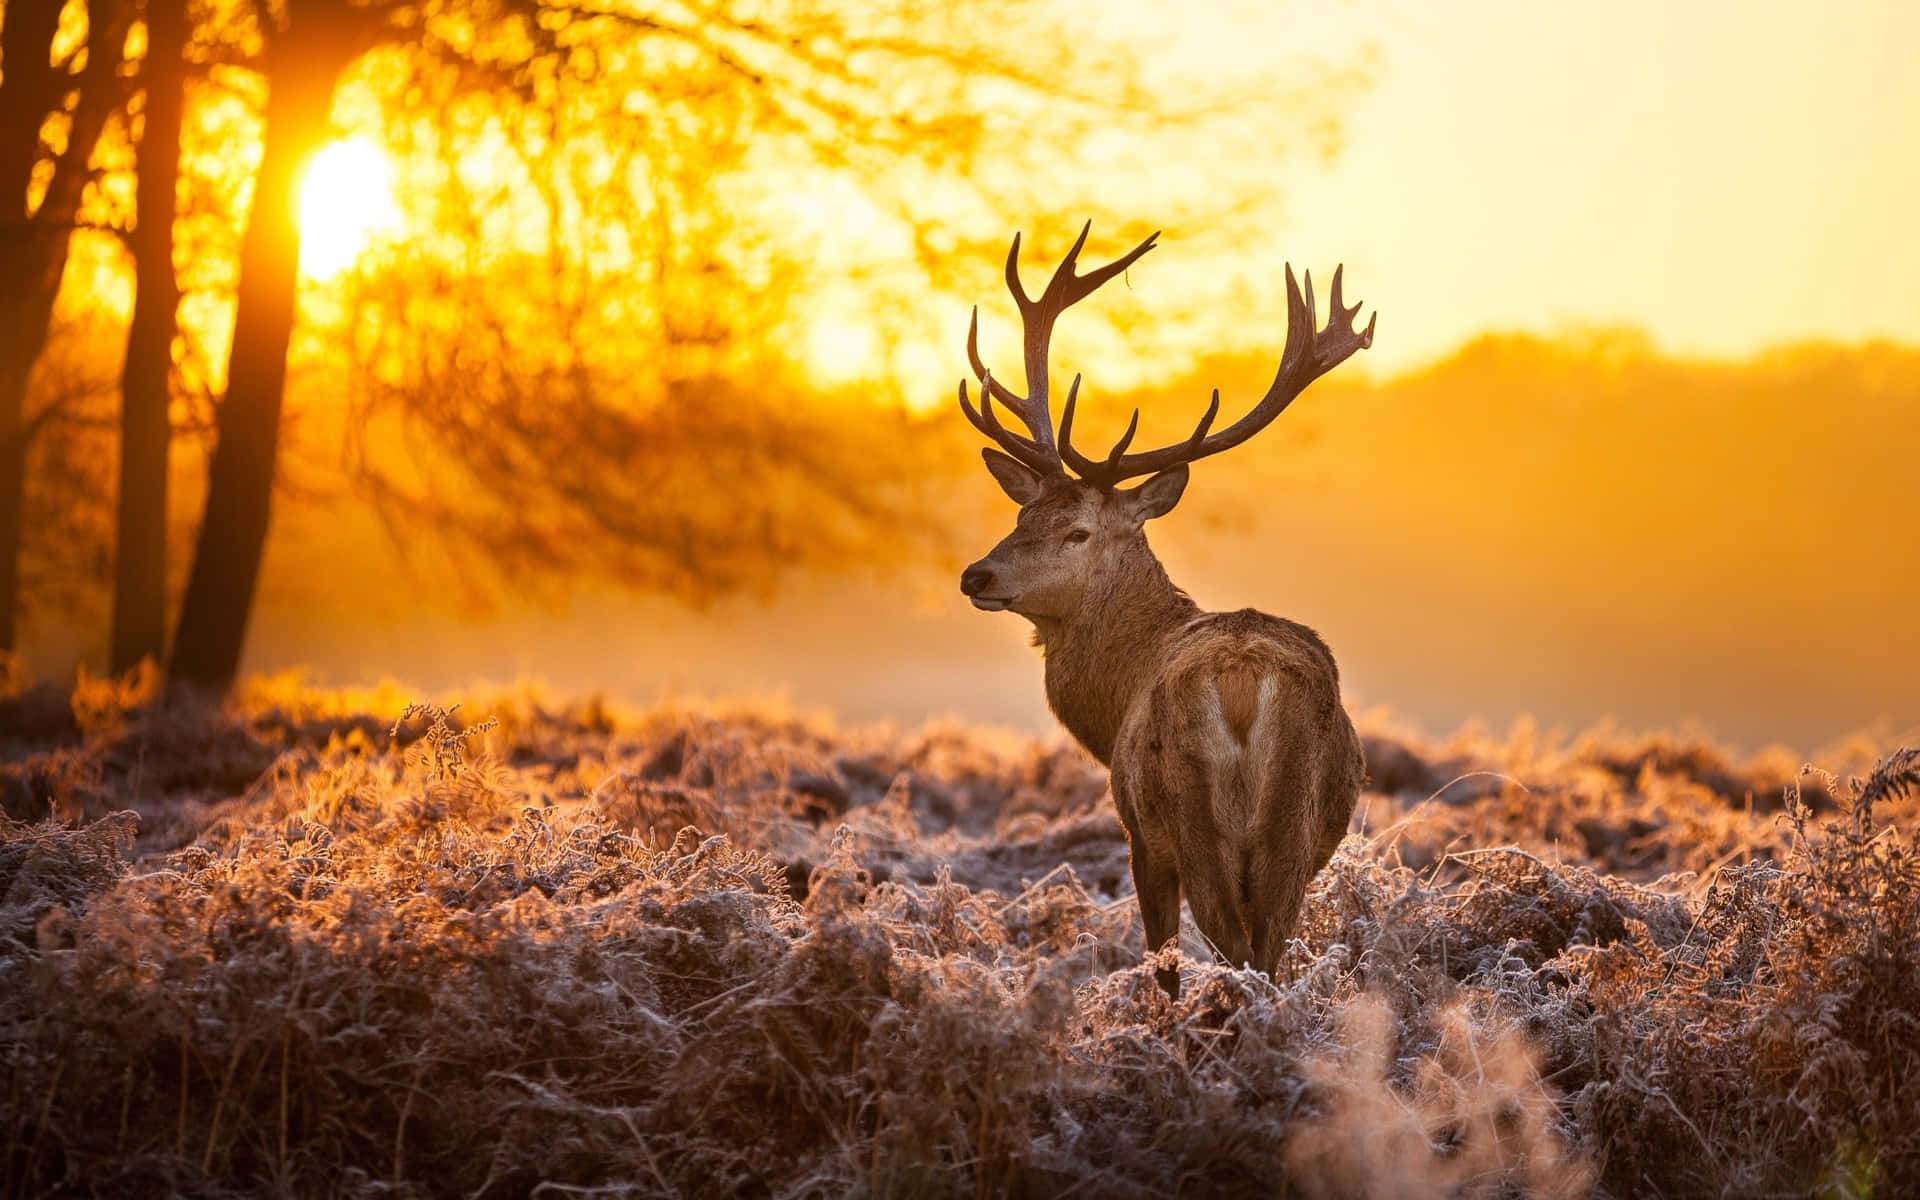 This Majestic Cool Deer Stands Tall In The Wilderness Background